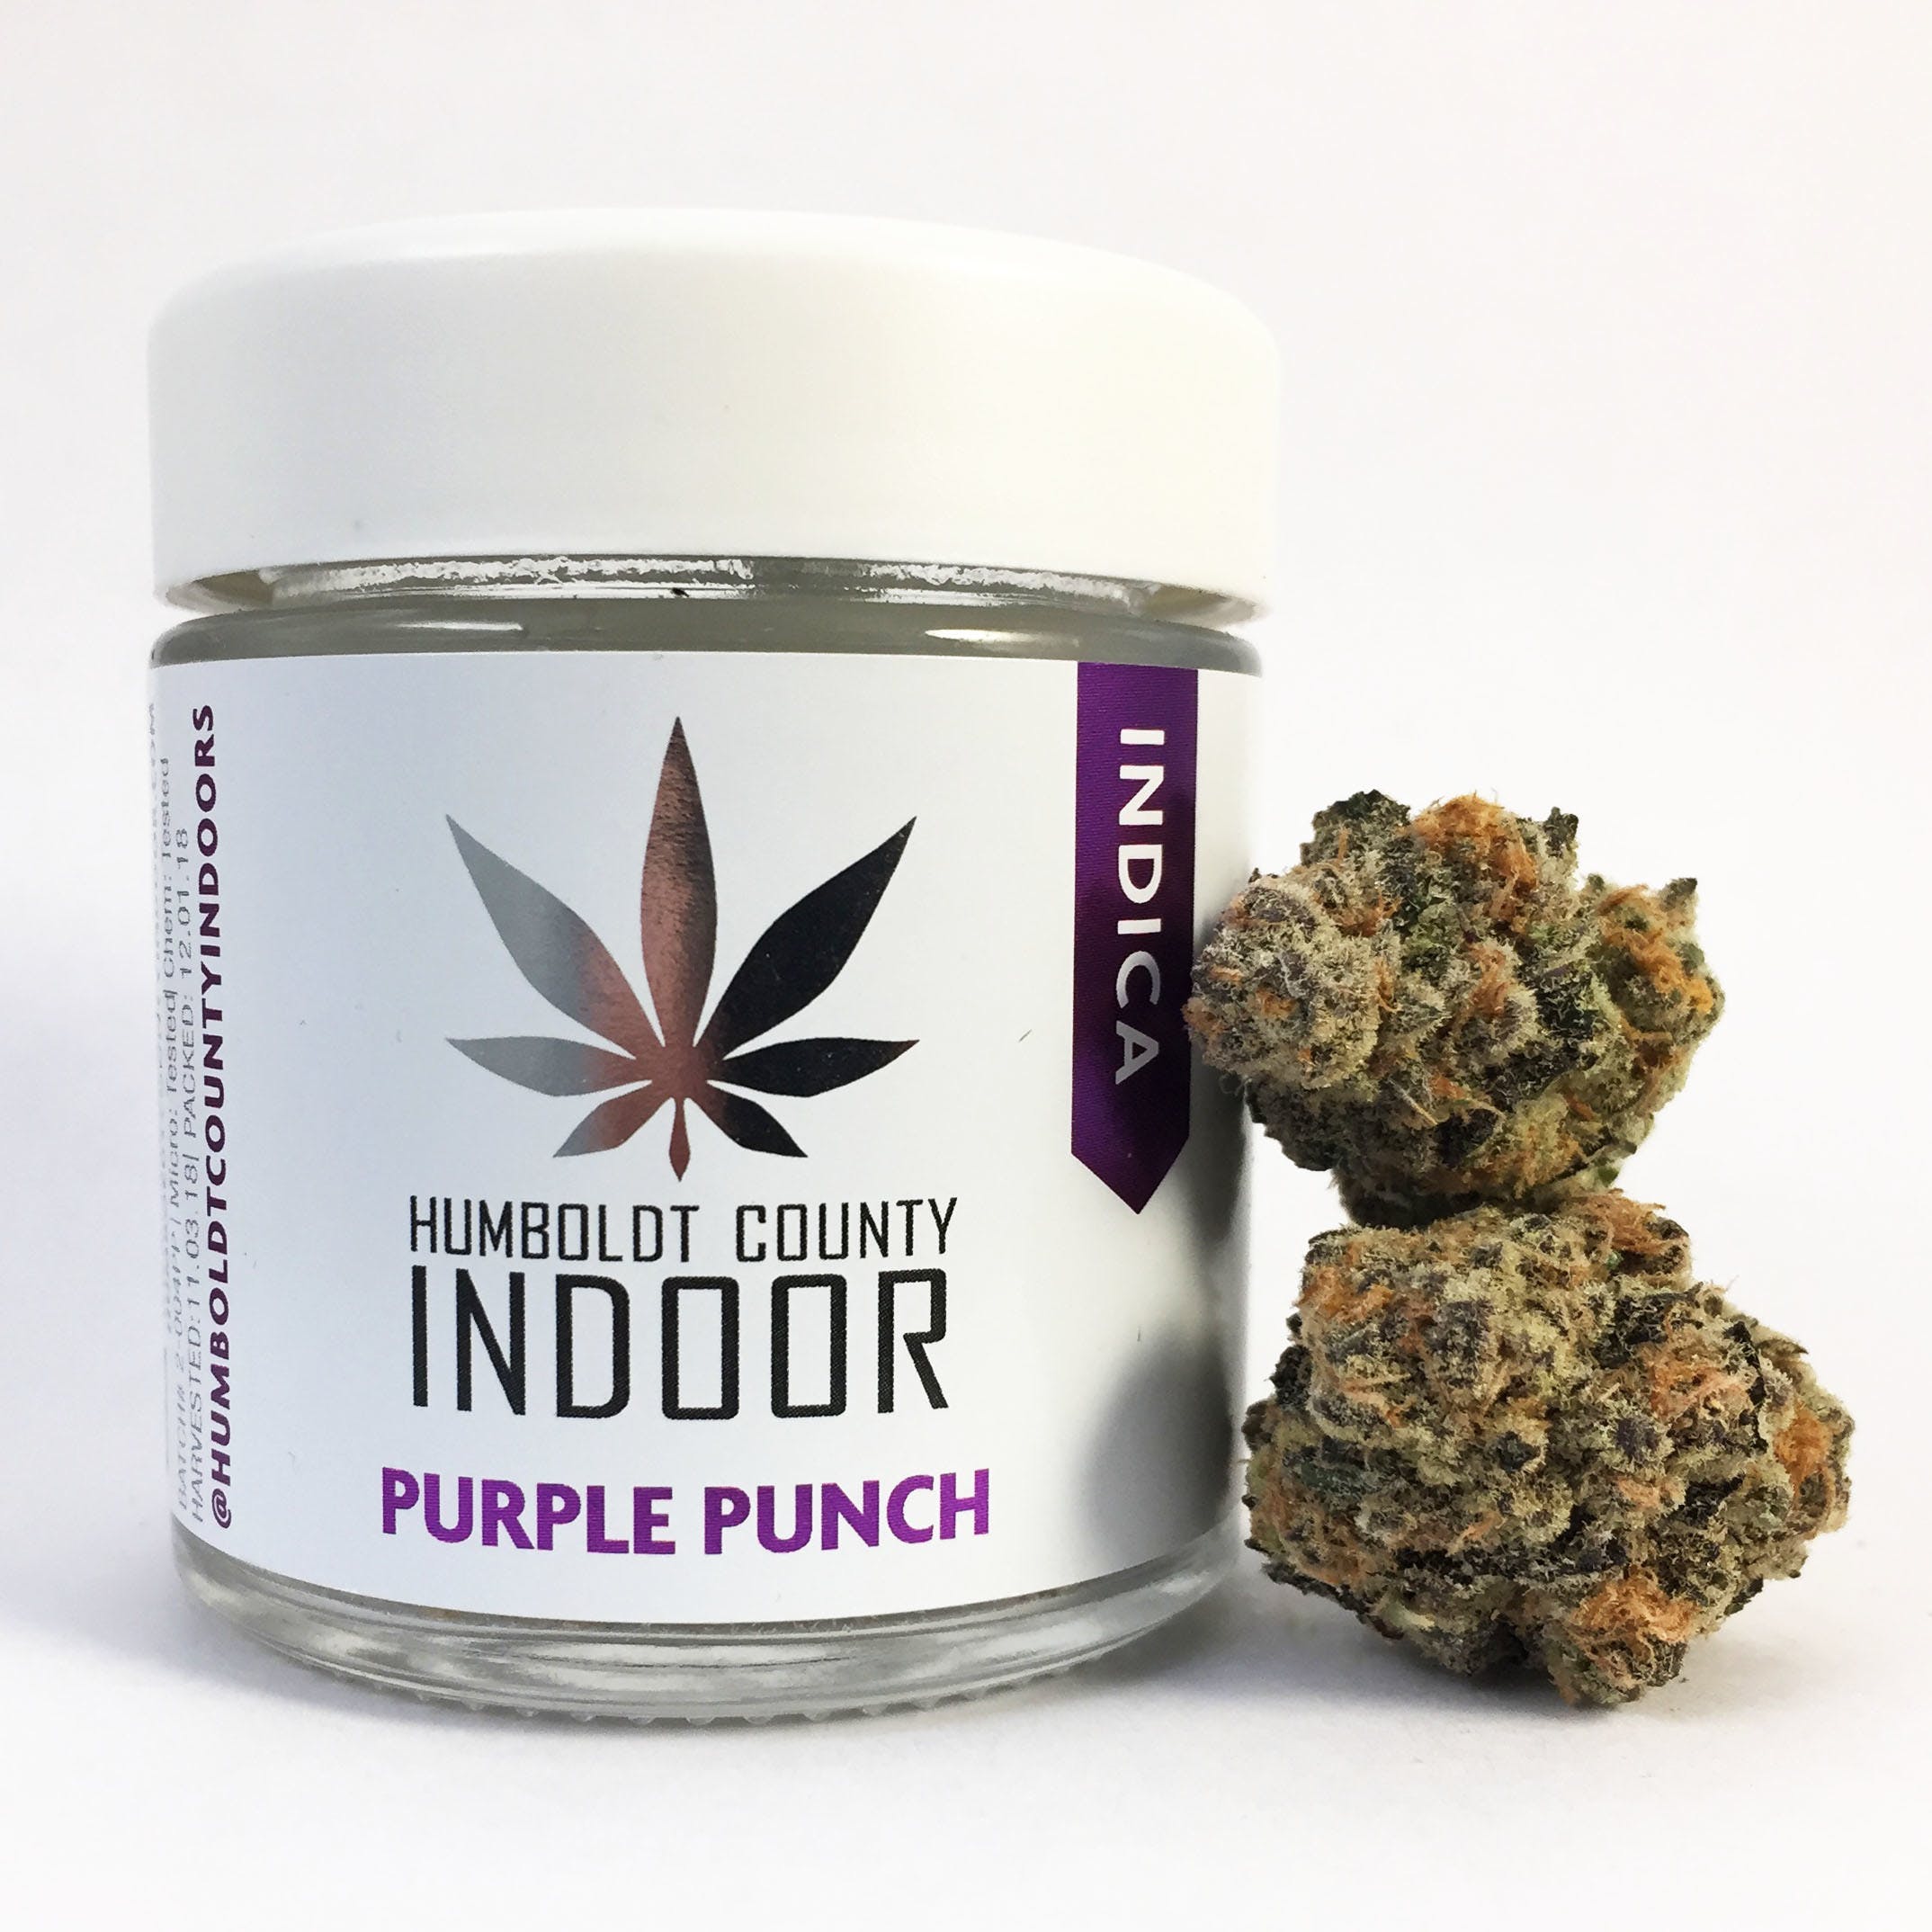 Purple Punch by Humboldt County Indoor